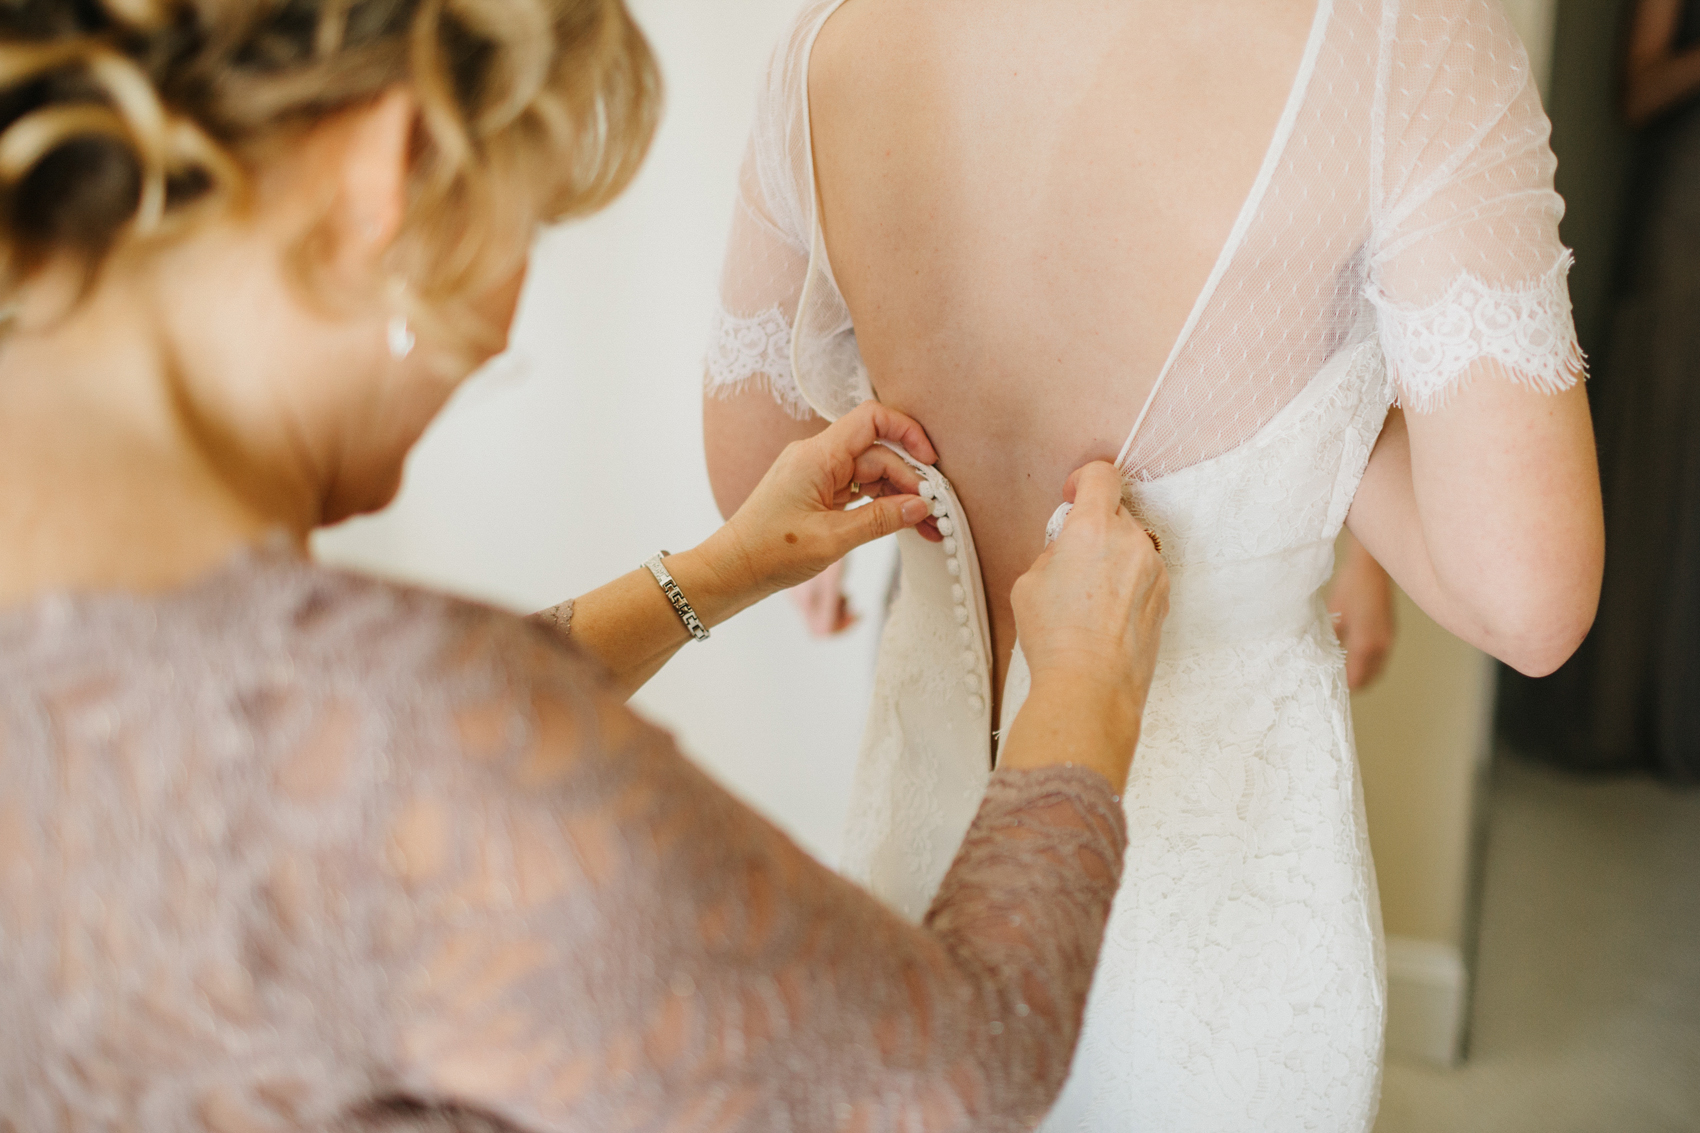 mother of the bride wearing a lavendar lace dress helping the bride get ready